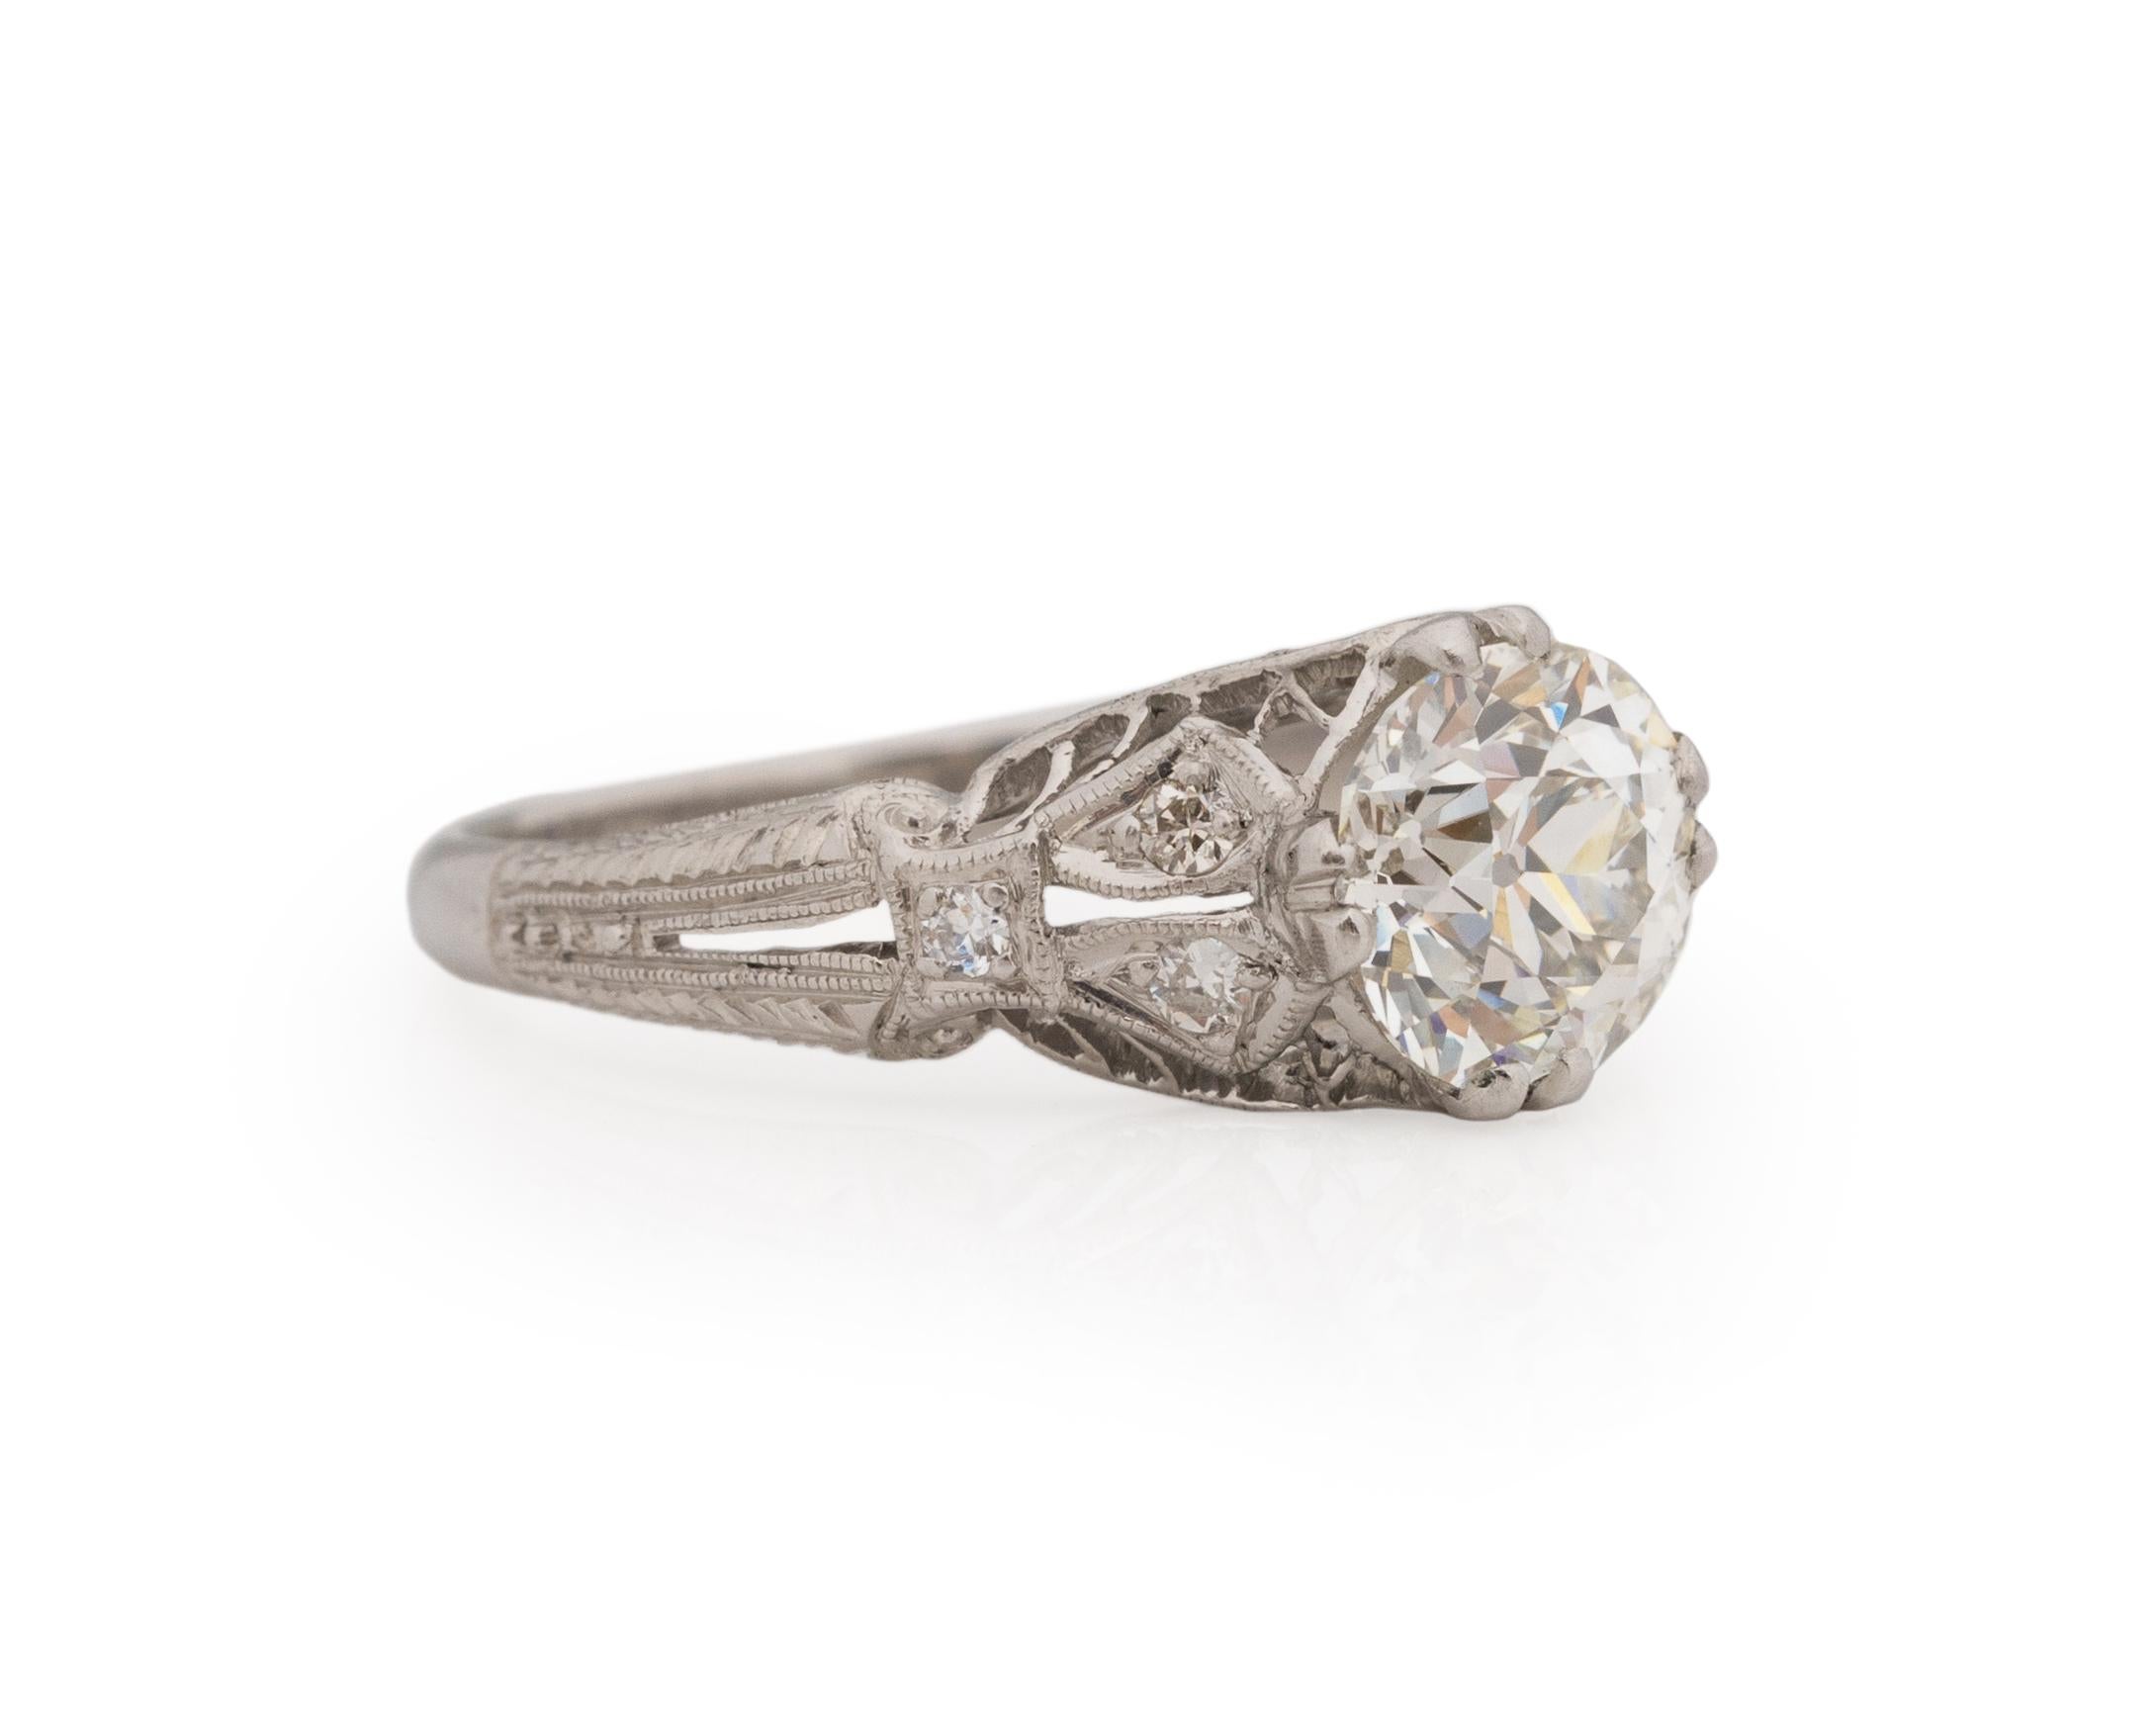 Ring Size: 5.25
Metal Type: Platinum [Hallmarked, and Tested]
Weight: 3.0 grams
Diamond Details:
GIA REPORT #: 2225420703
Weight: 1.32ct
Cut: Old European brilliant
Color: J
Clarity: VS1
Measurements: 6.90mm x 6.73mm x 4.58mm
Finger to Top of Stone